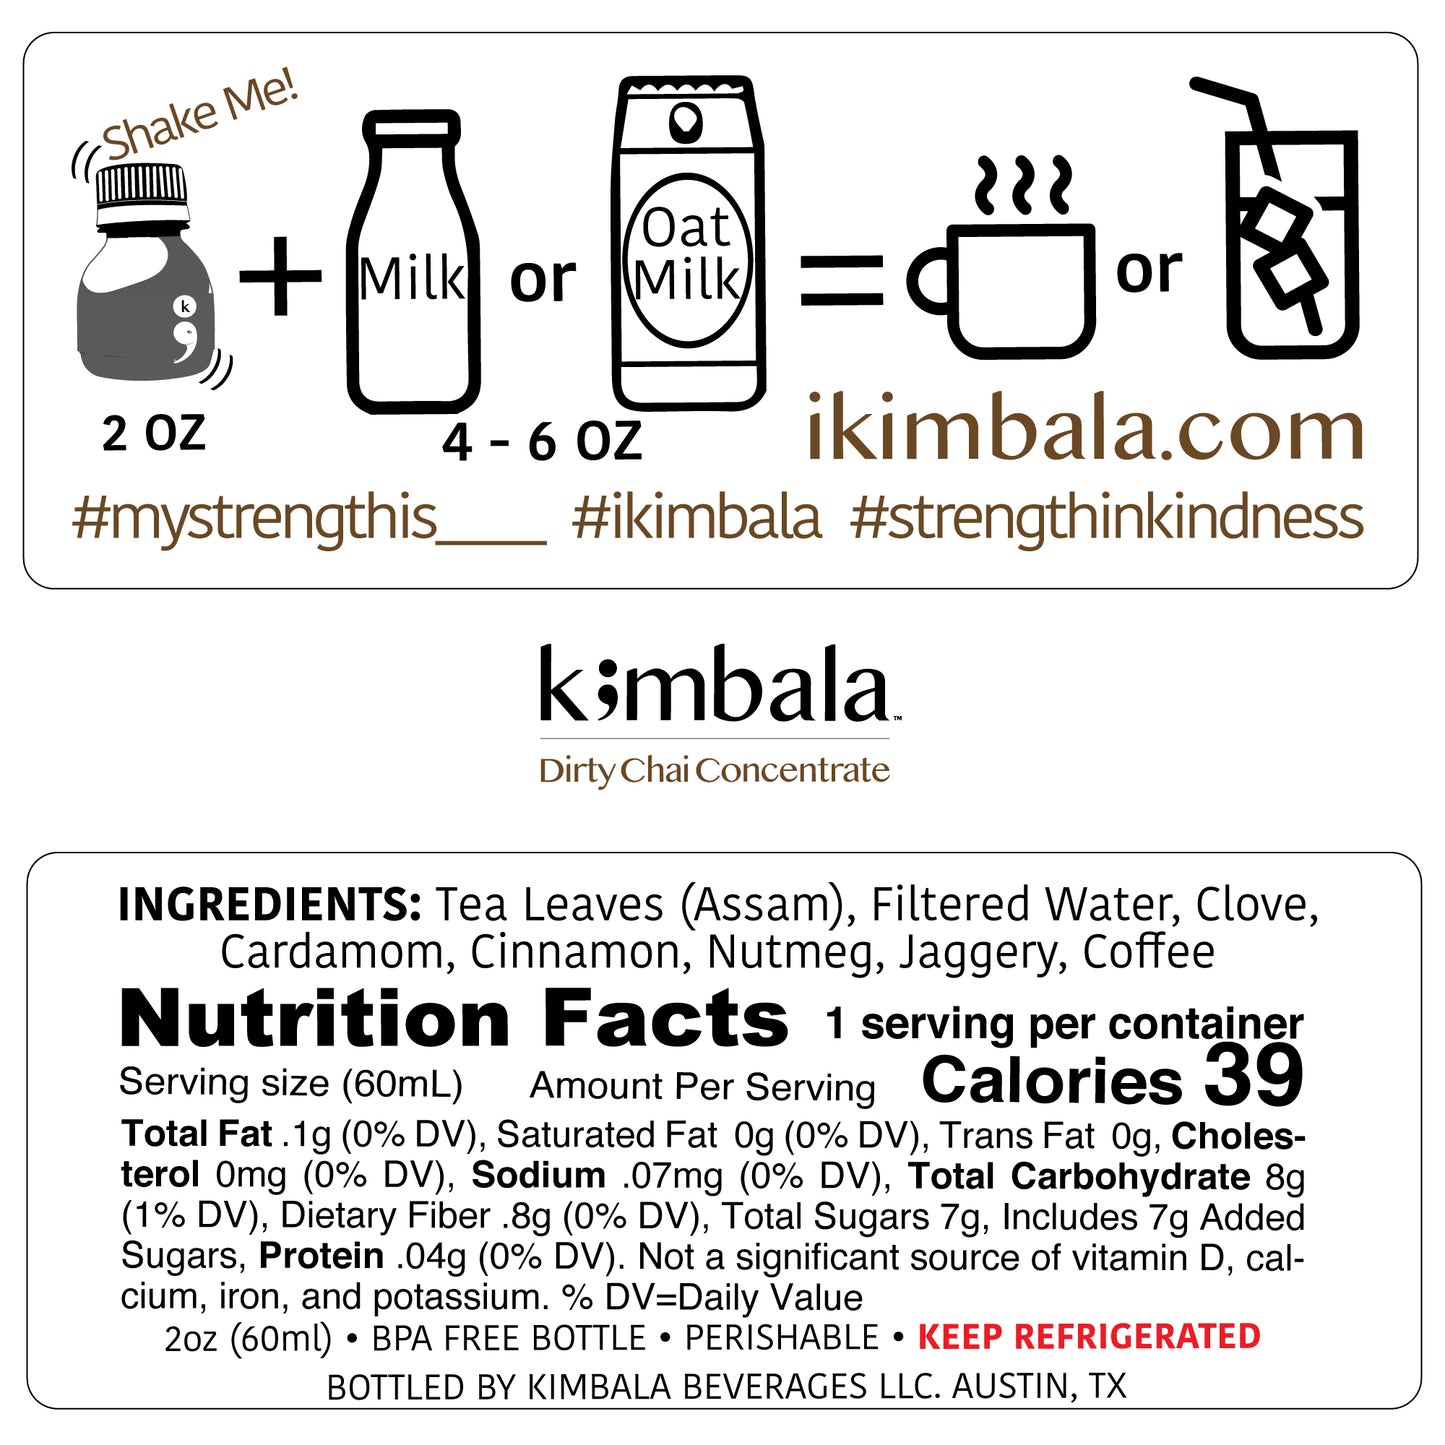 Kimbala dirty chai concentrate nutrition facts for 2oz bottle